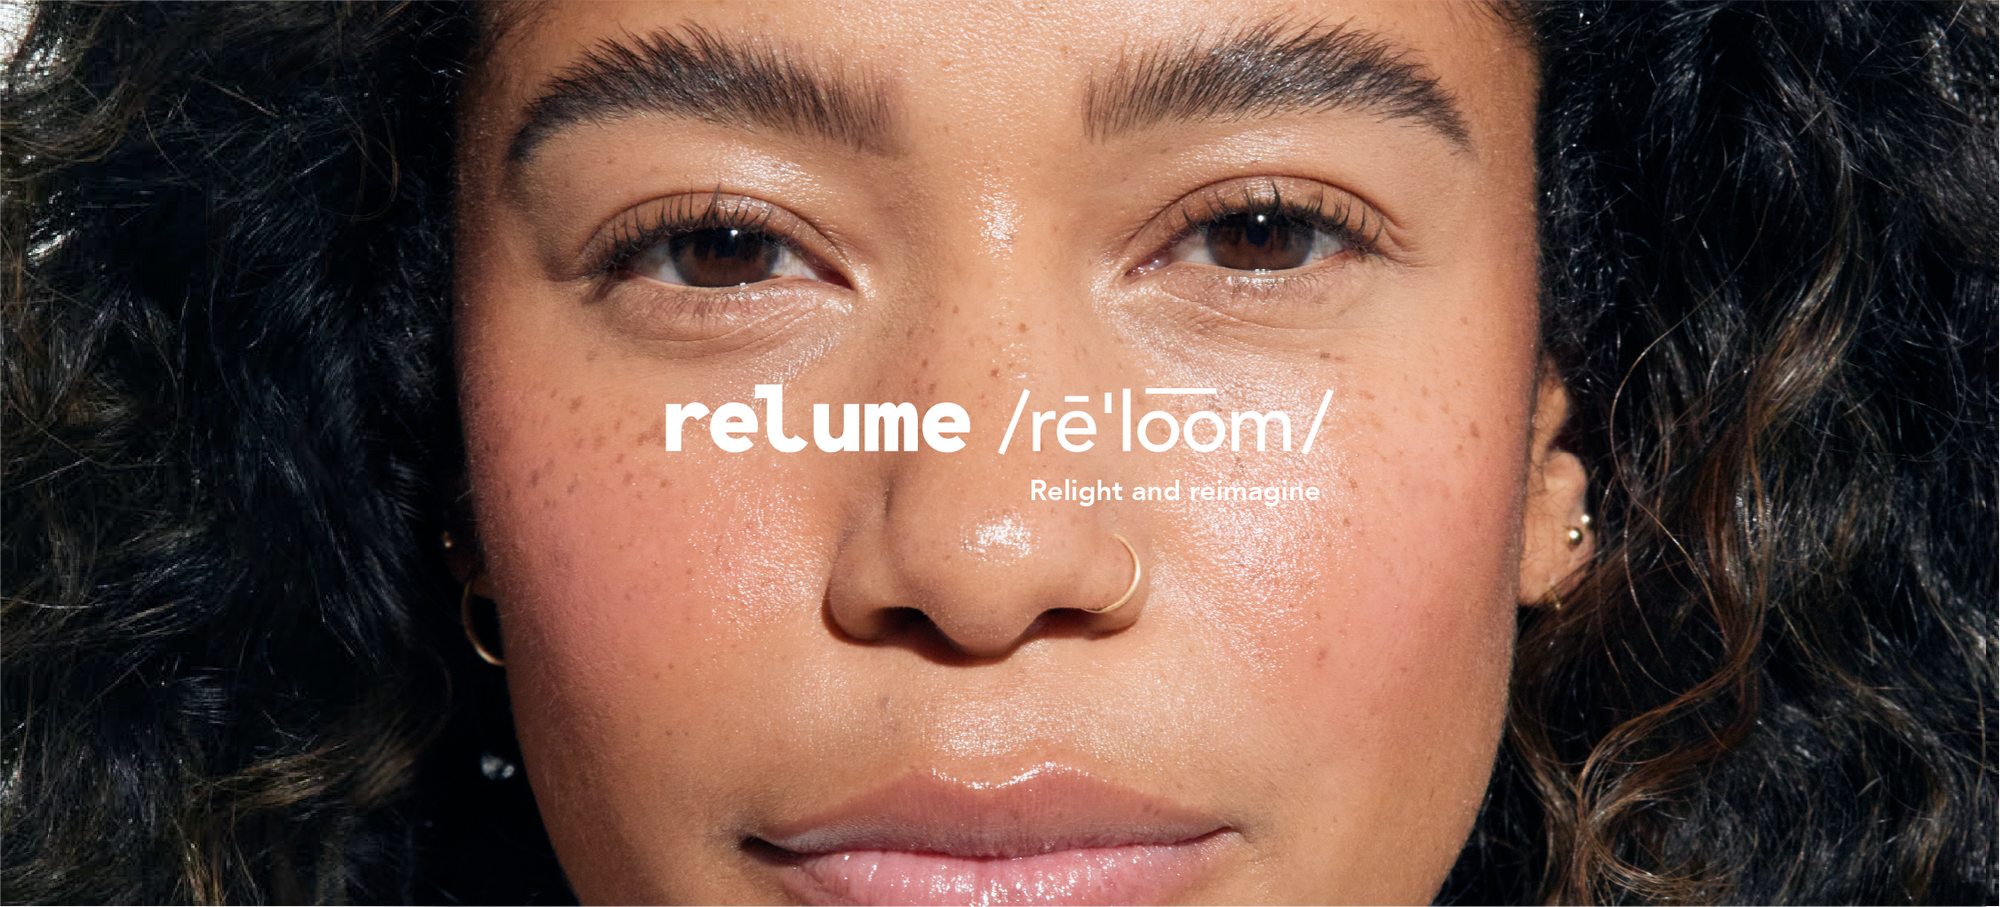 Banner image: model's face with phonetic Relume logo